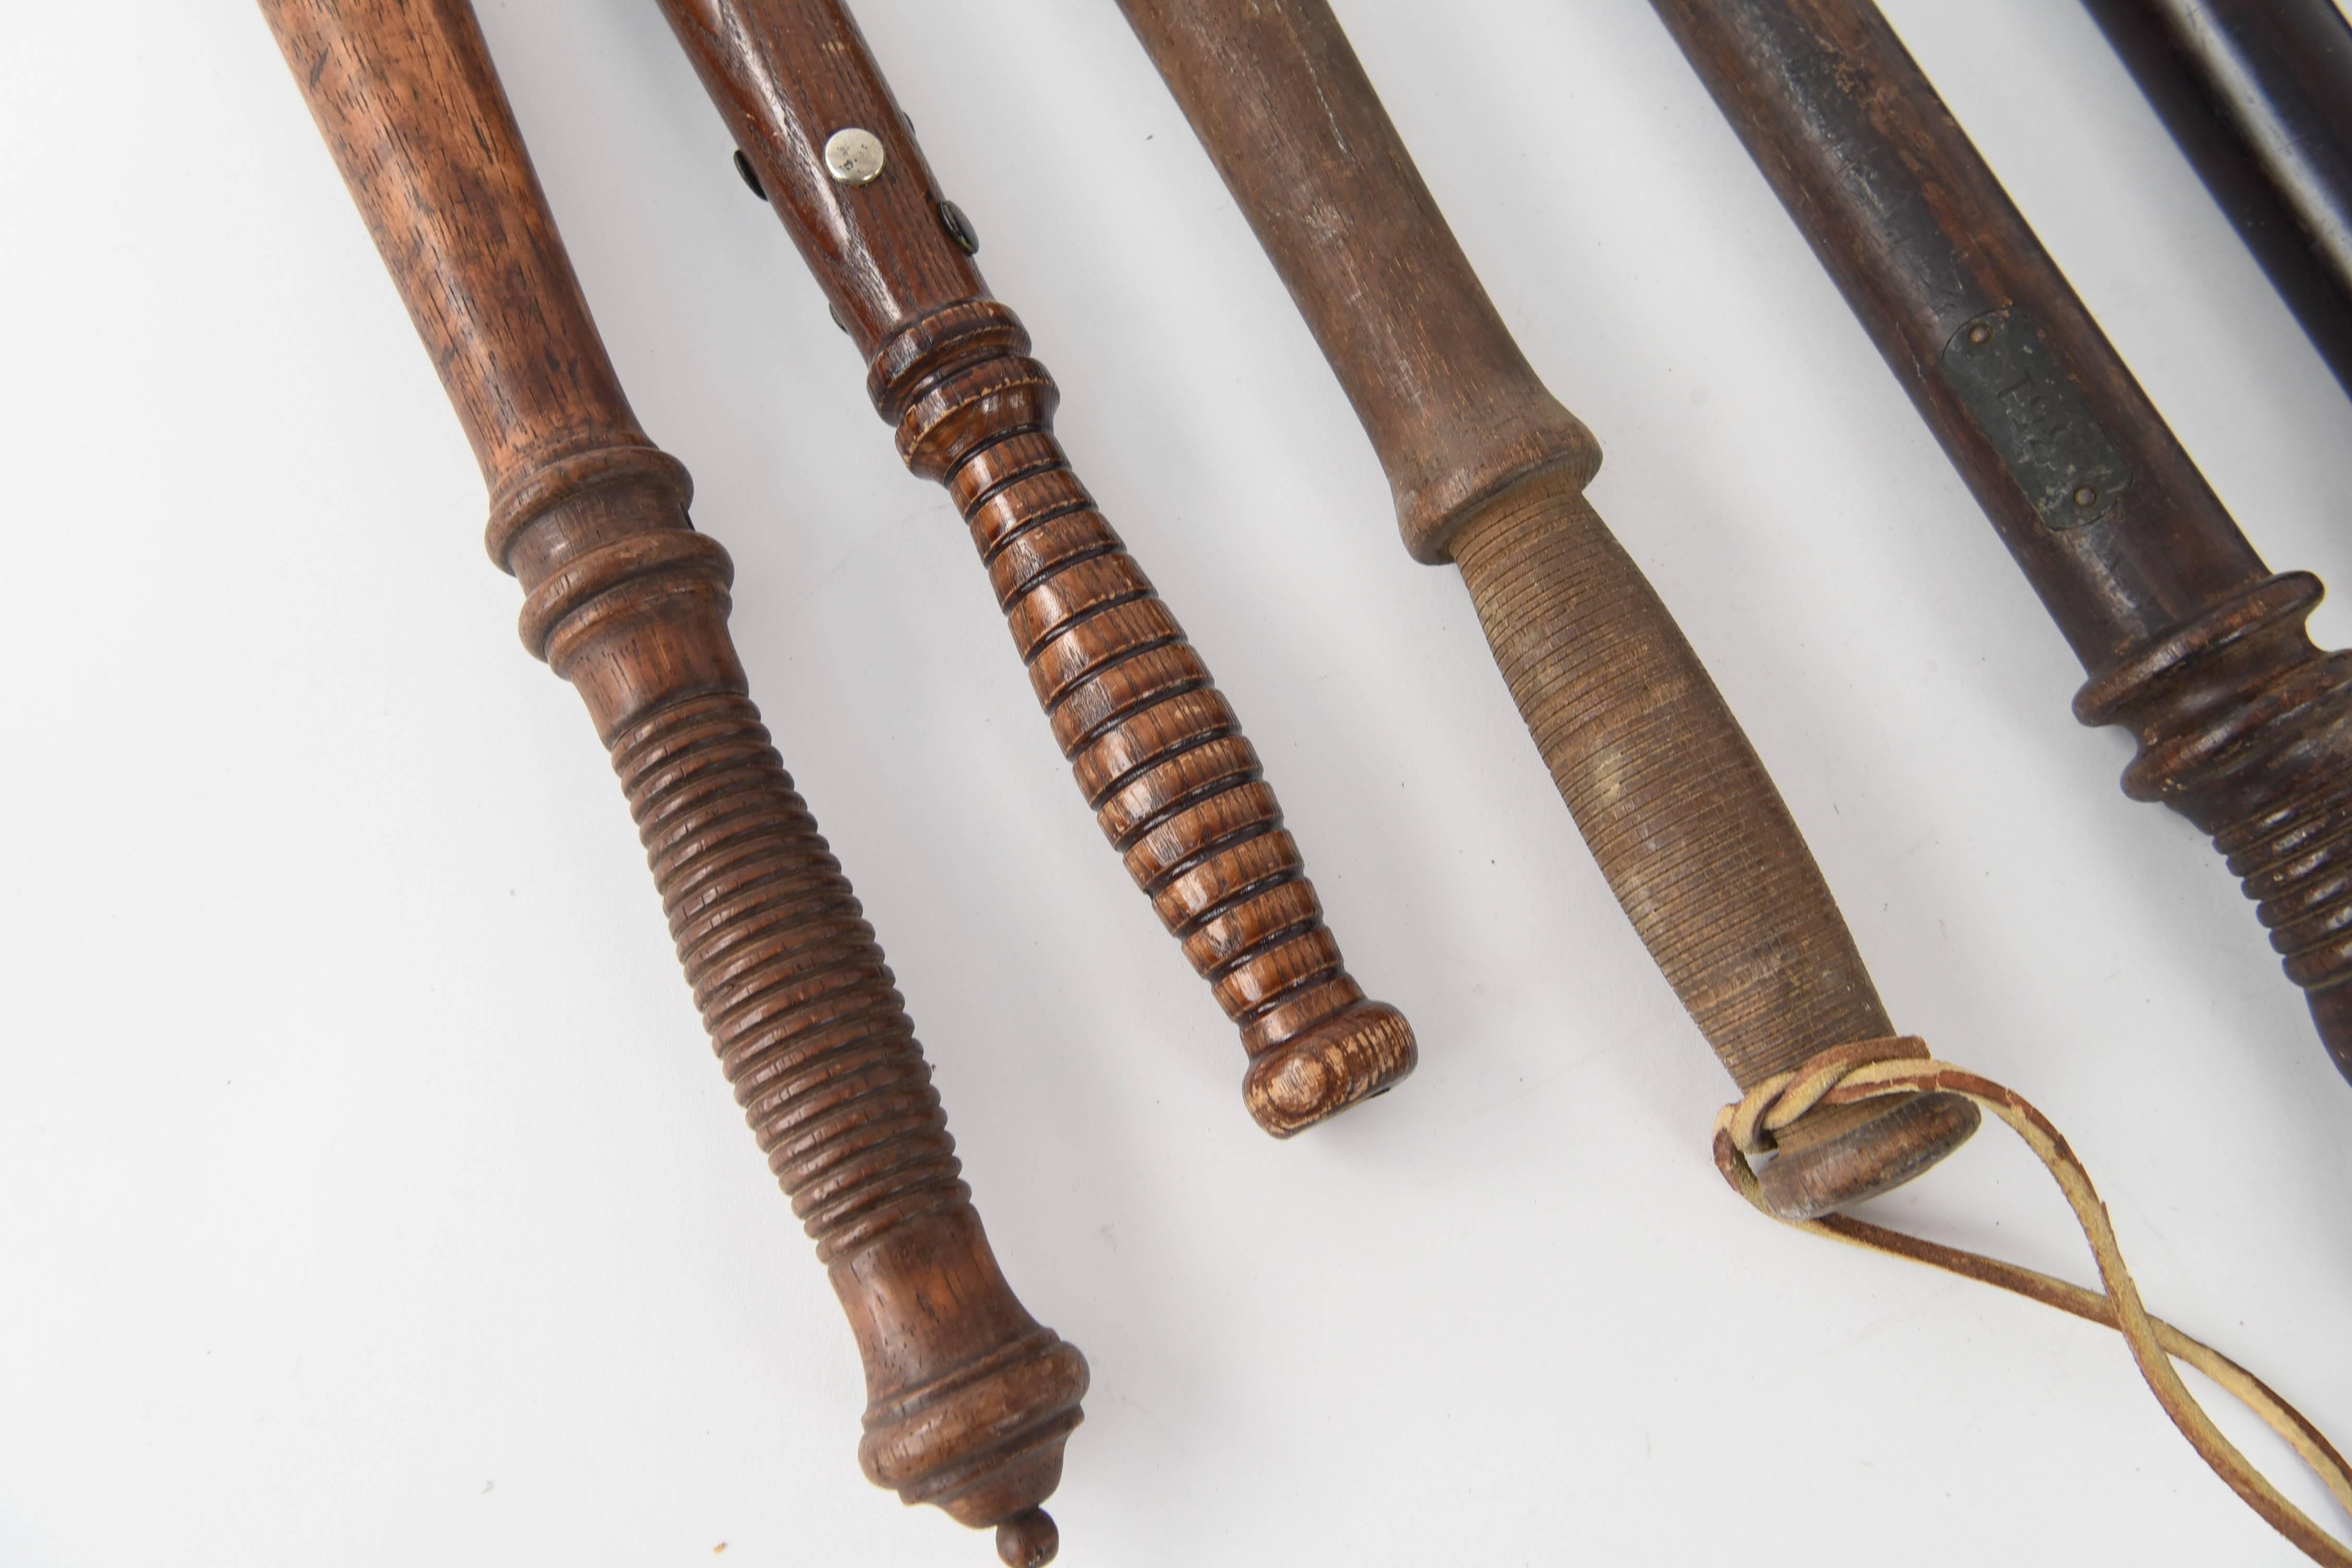 A very neat assembled collection of different batons, mostly used by law enforcement at the turn of the century.